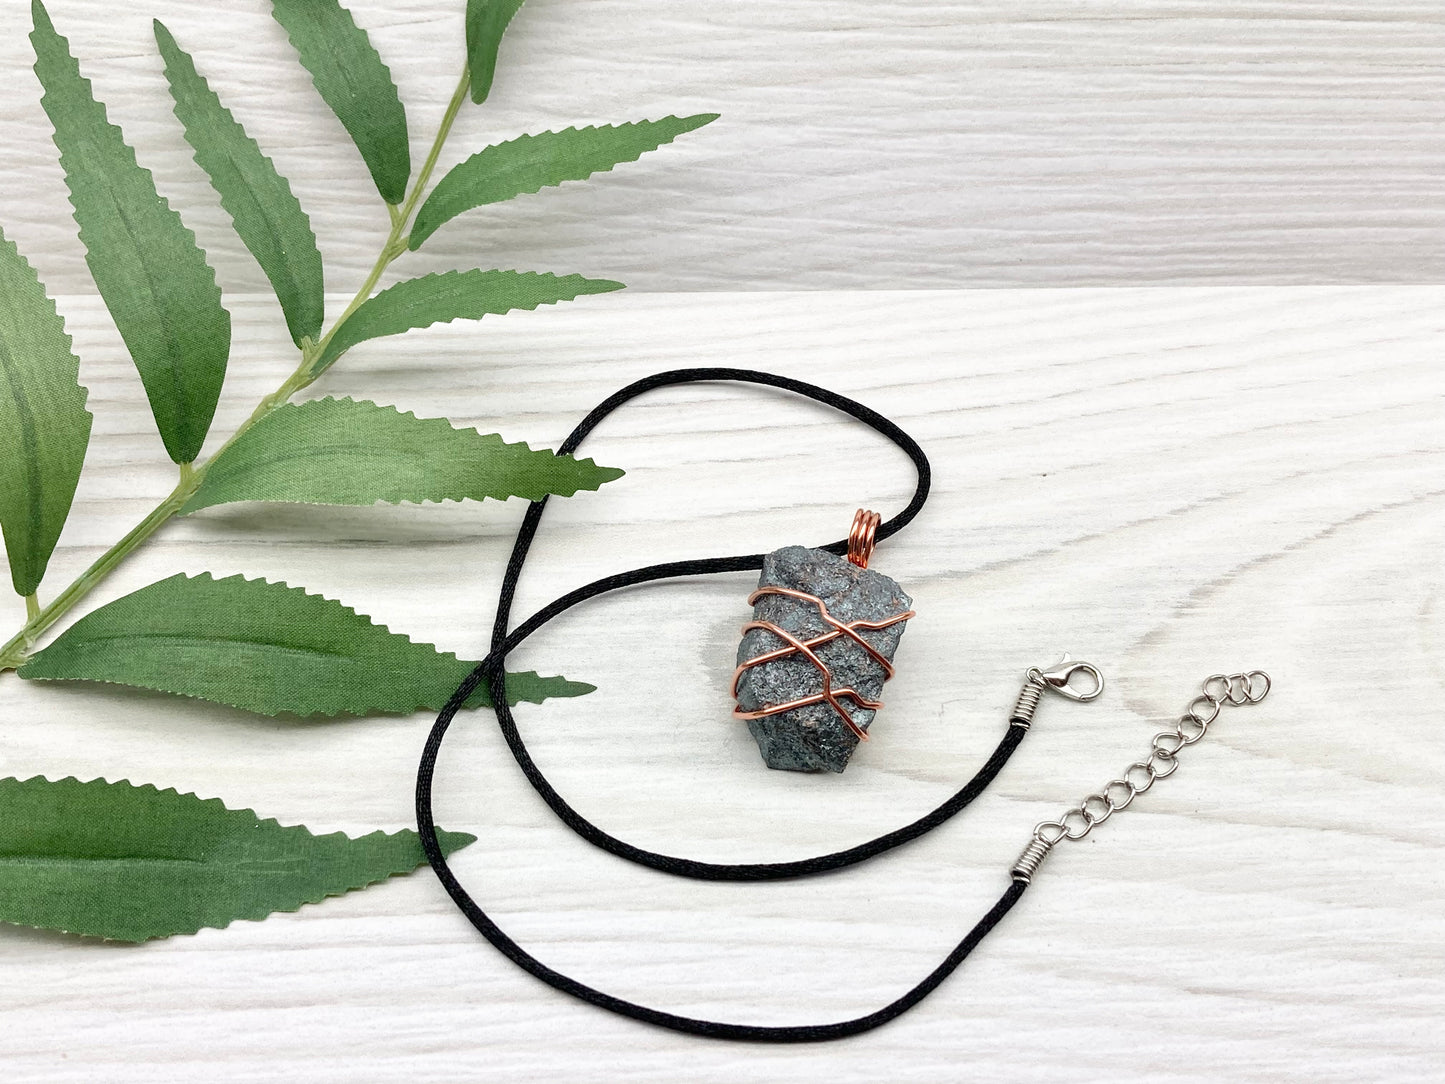 Raw Hematite Necklace. Gray Metallic Colored Stone Hand Wrapped With Pure Copper Wire. Comes On A Black Chain. New Age Jewelry For Him Or Her. Aquarius Zodiac Gemstone.